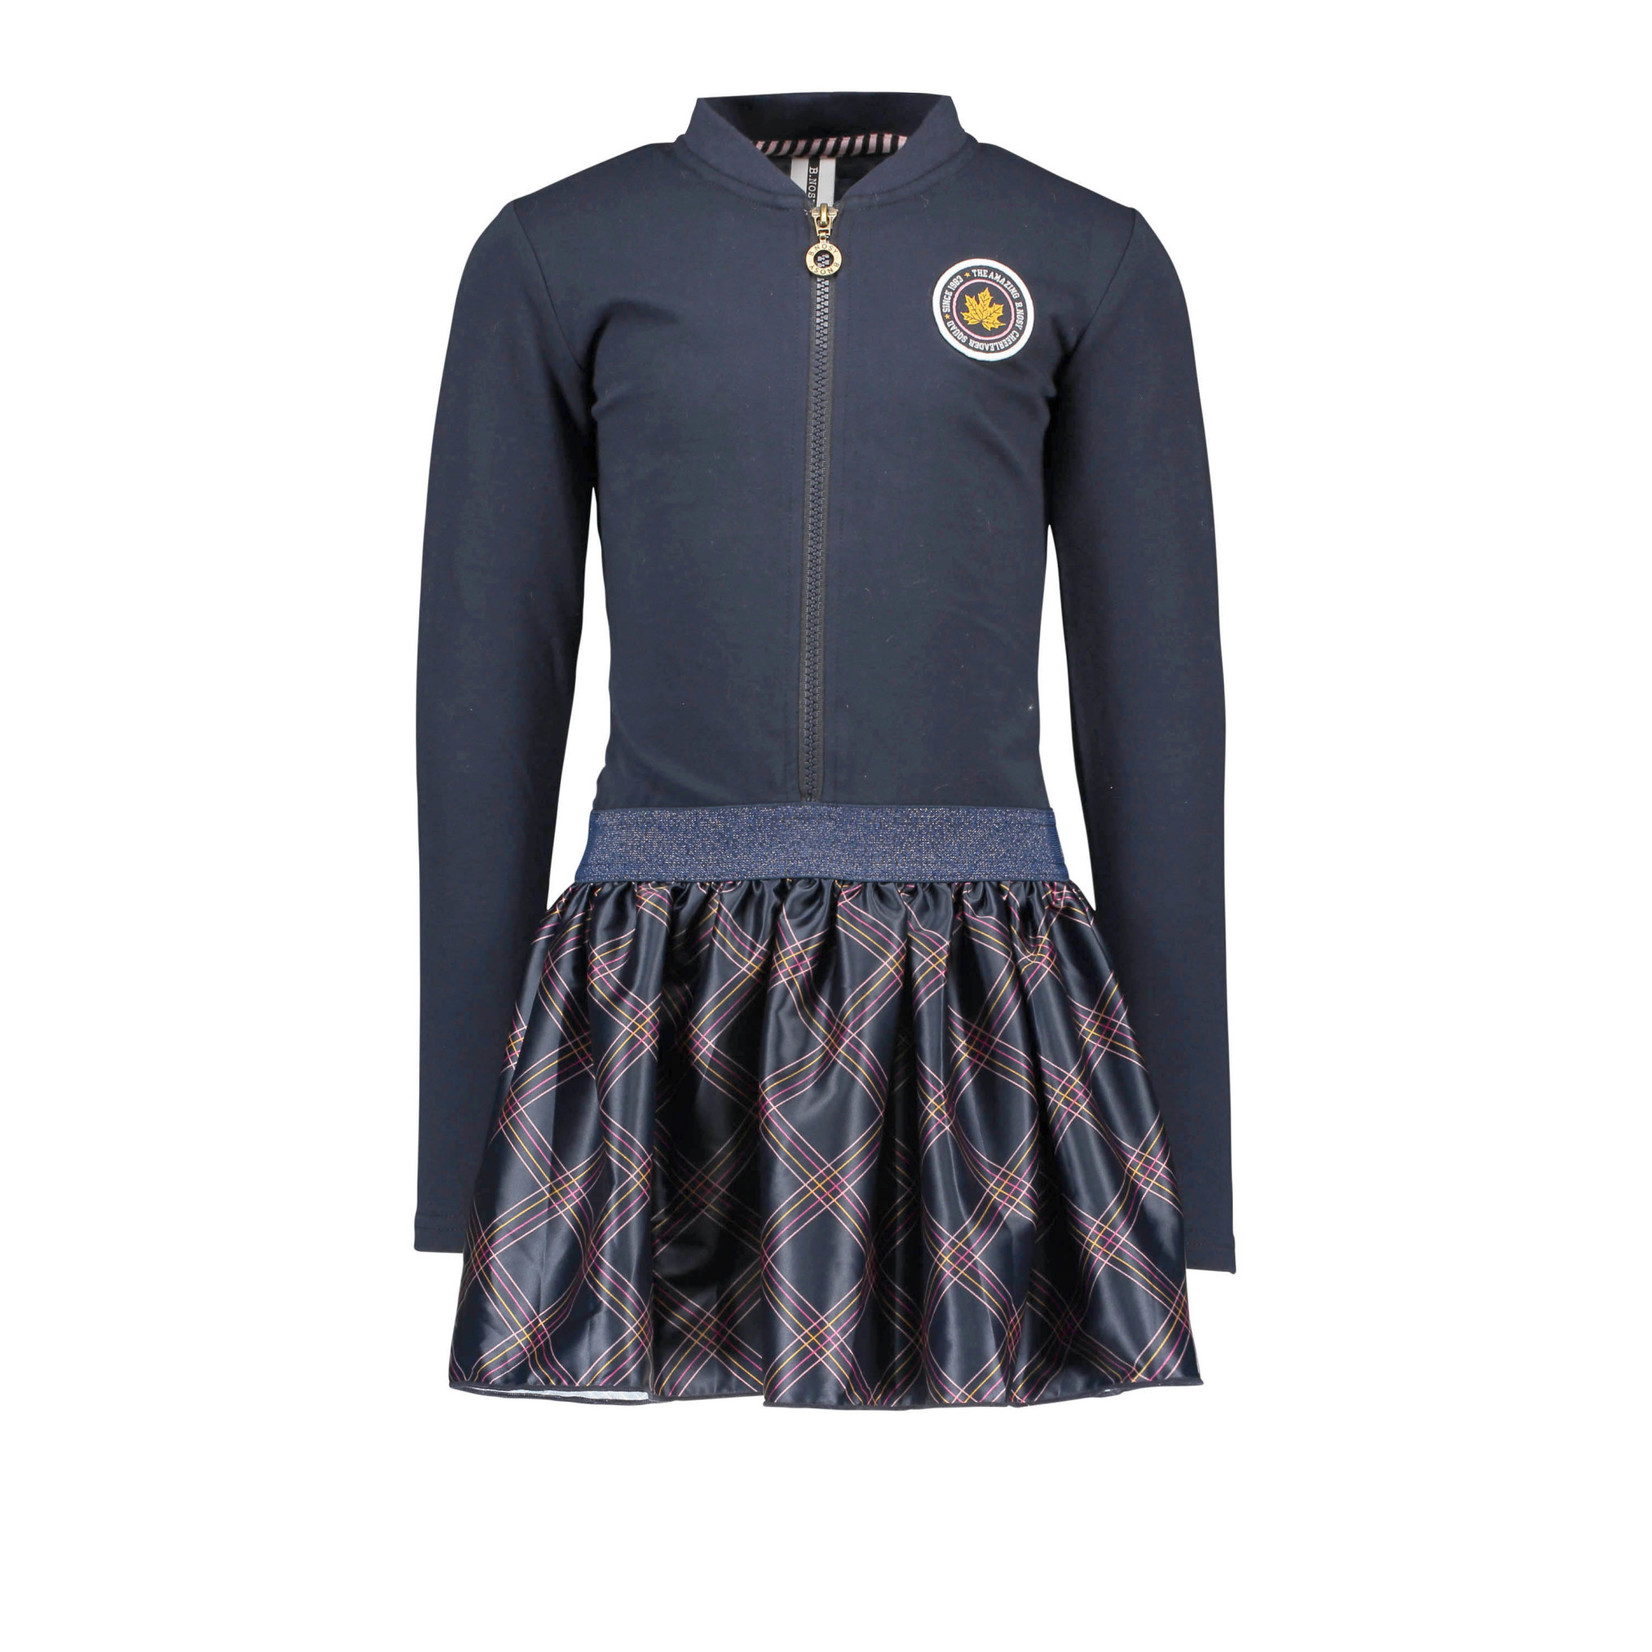 B-nosy Girls dress with sporty check skirt and zipper closure